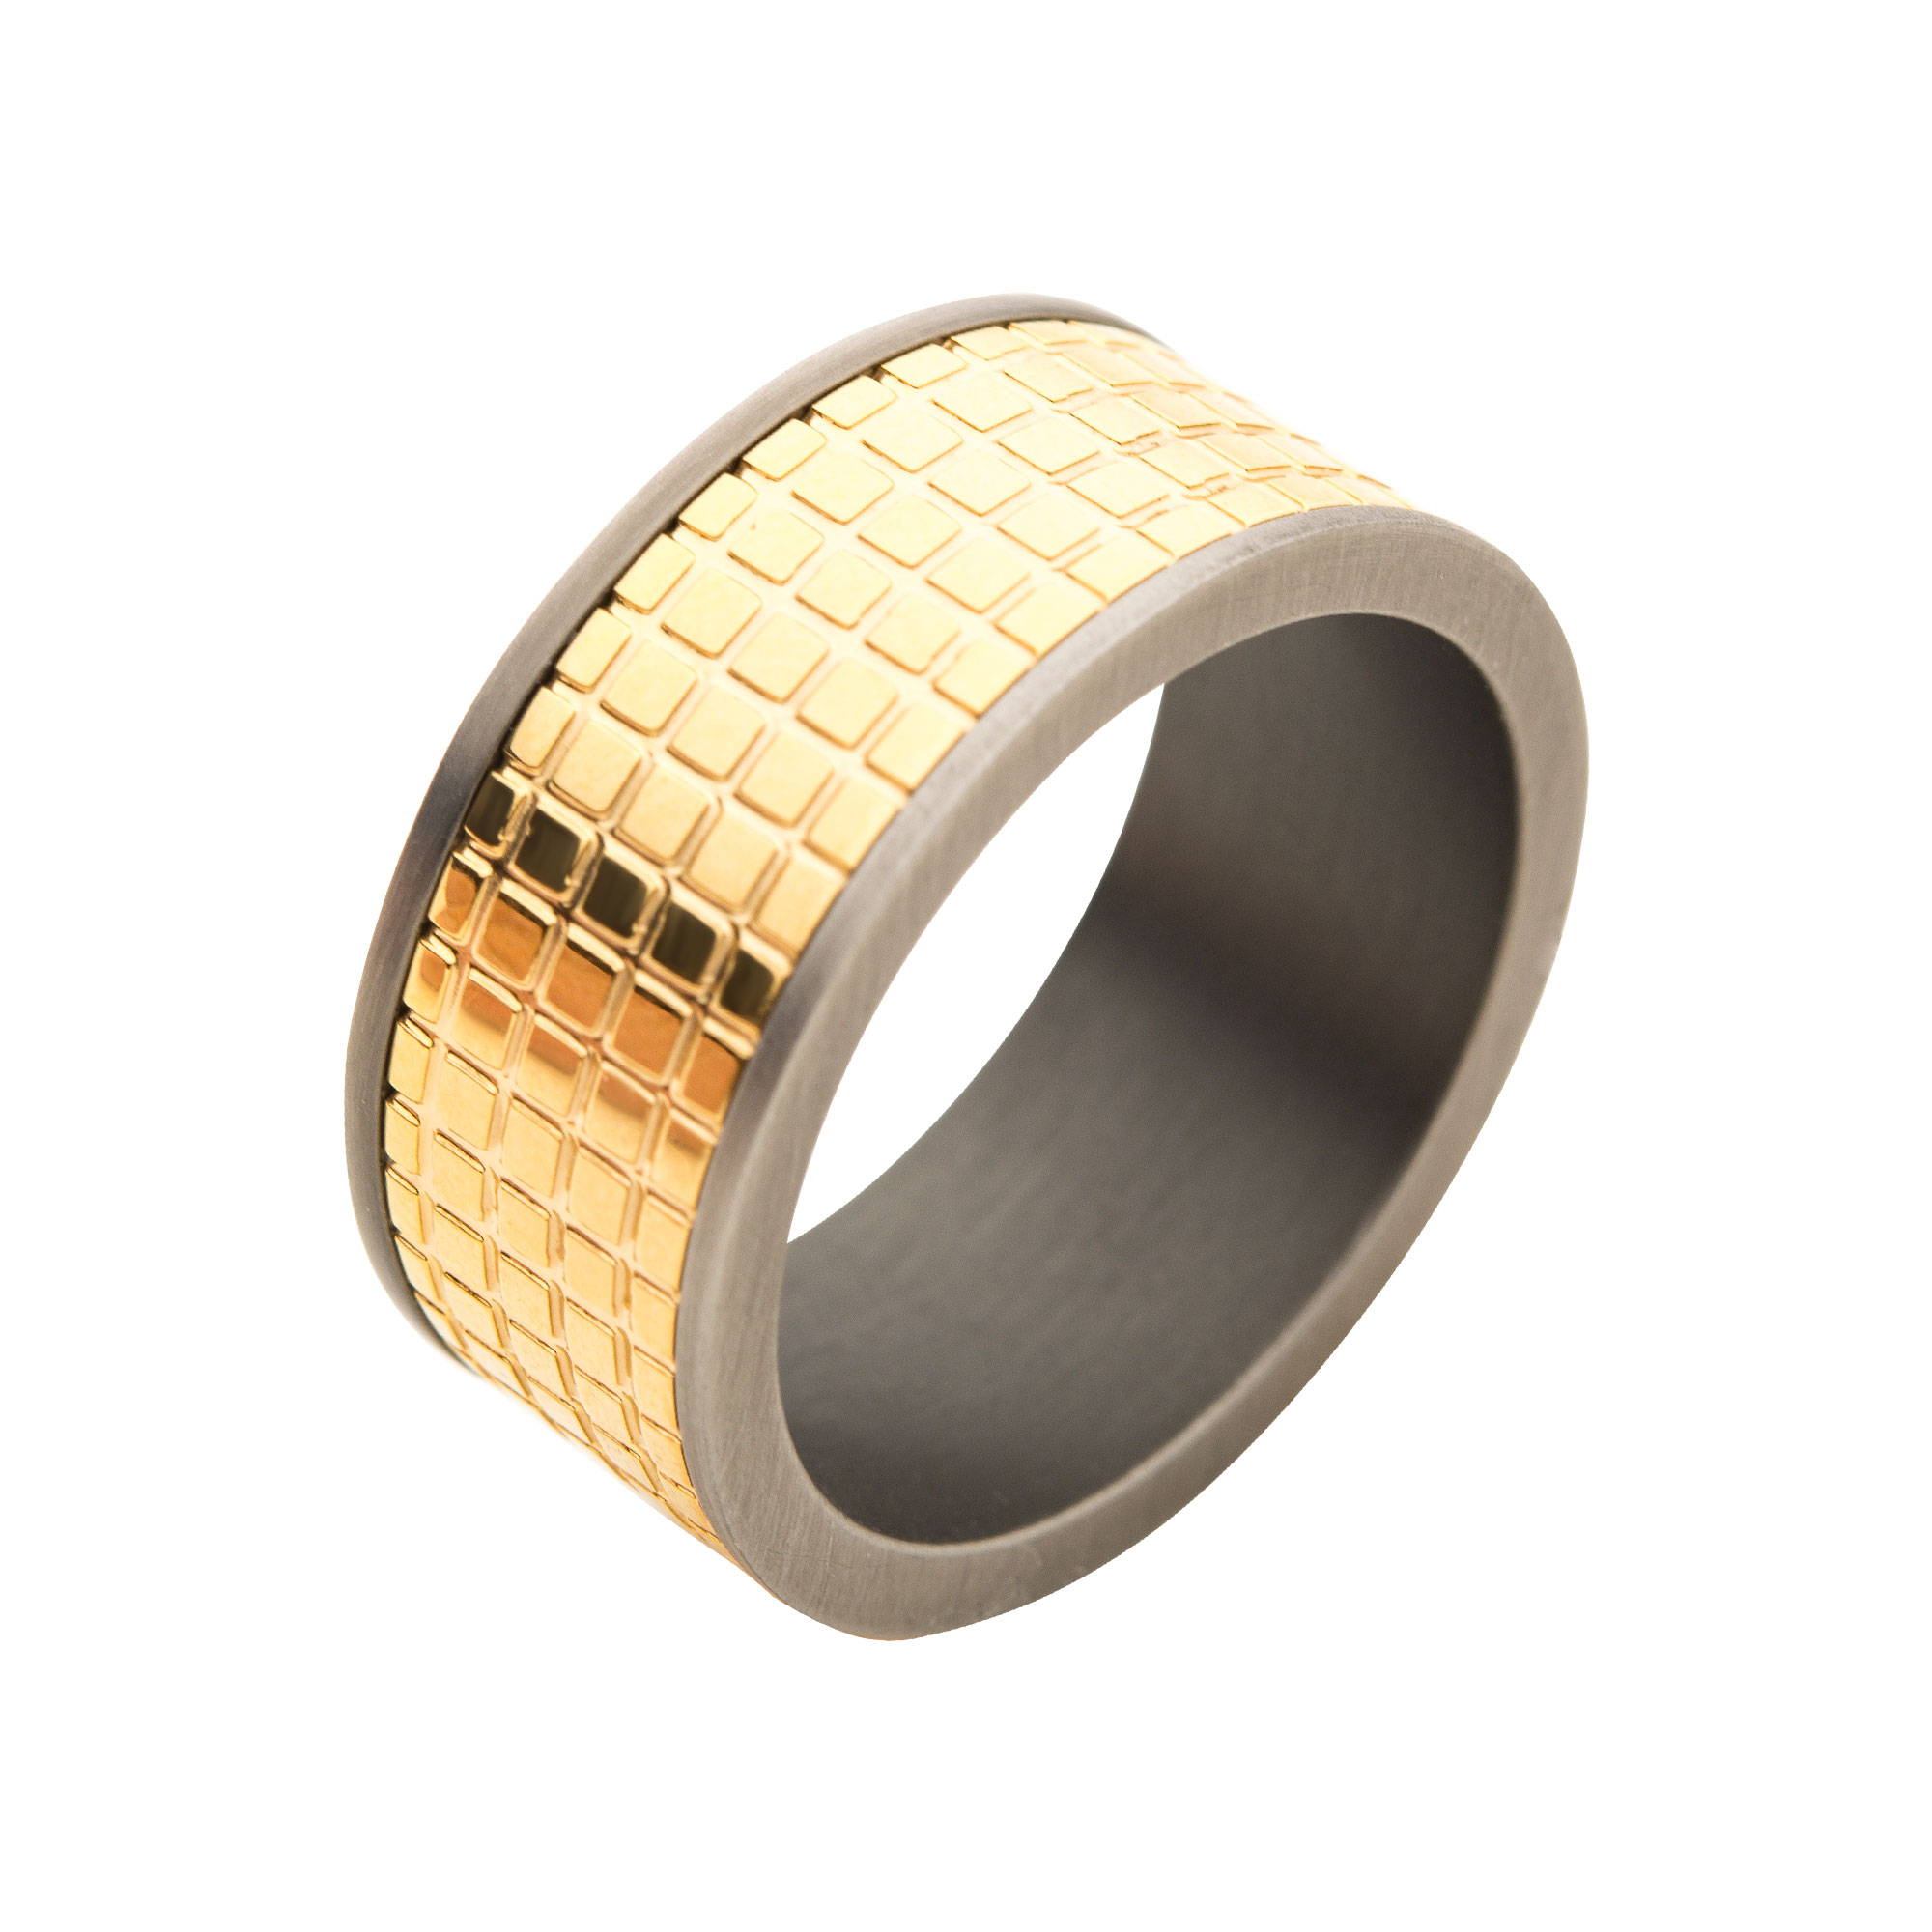 Gun Metal Plated with 18K Gold Plated Grid Inlay Ring Enchanted Jewelry Plainfield, CT